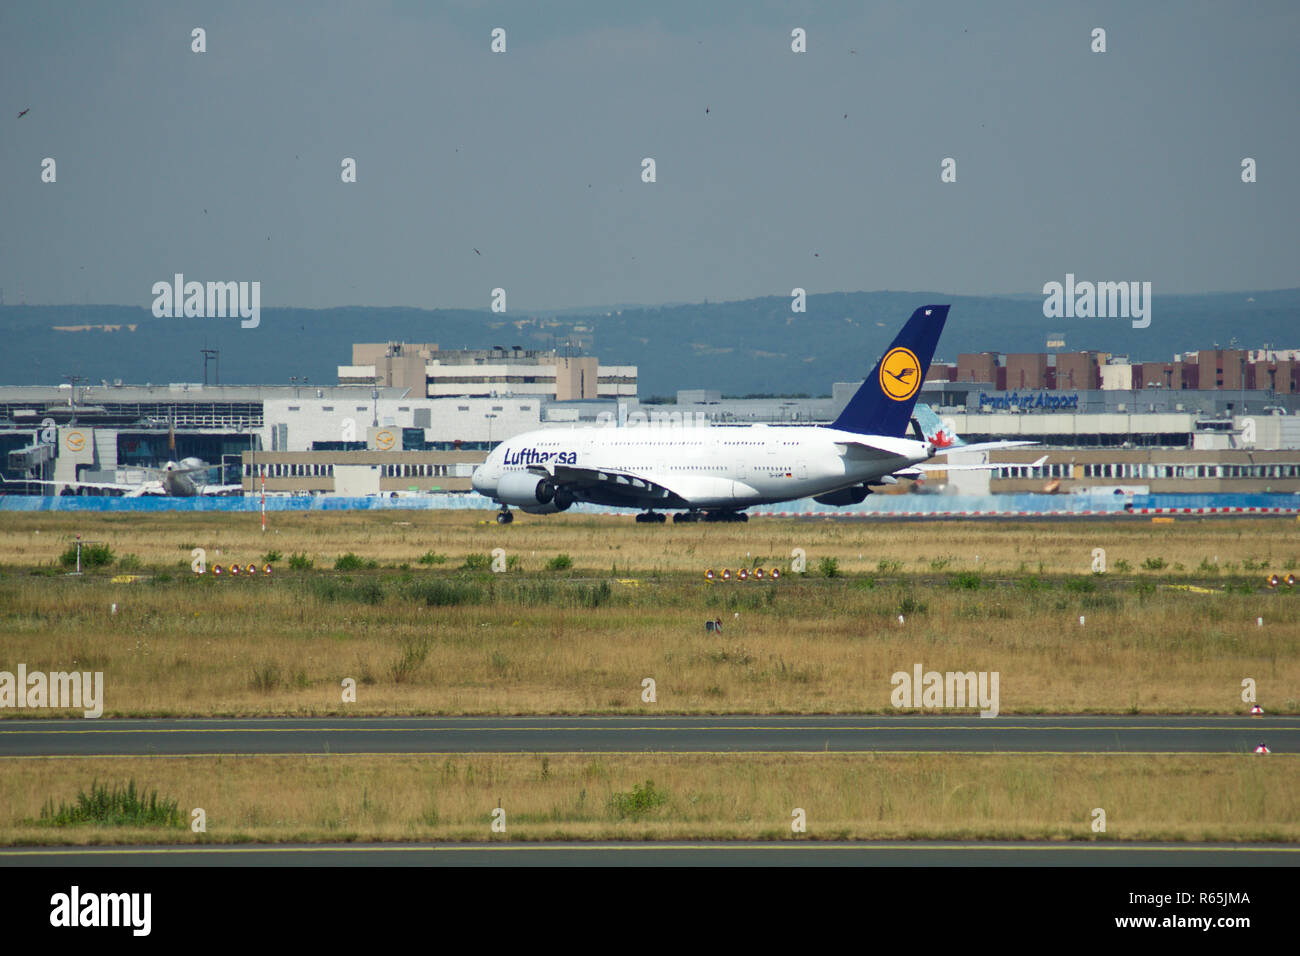 FRANKFURT, GERMANY - JUN 09th, 2017: Lufthansa Airbus A380 MSN 66 - D-AIMF aircraft takeoff from the airport. A380 is the flagship of Lufthansas airplane fleet Stock Photo